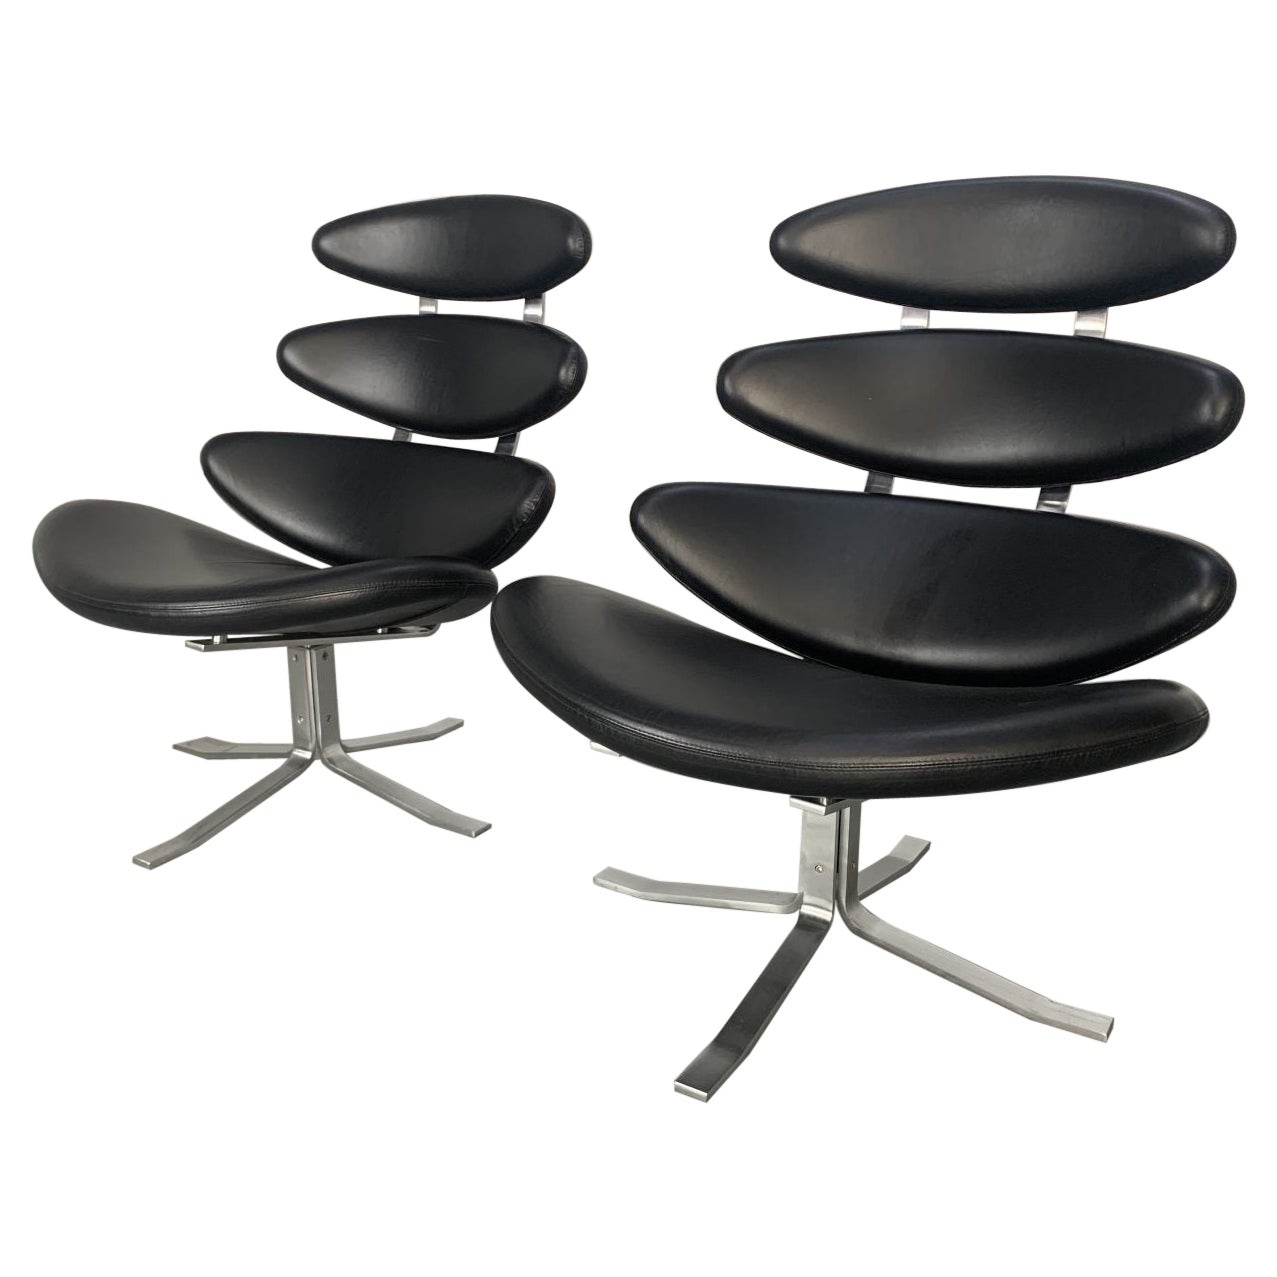 Spectacular Pair of Erik Jorgensen “Corona” EJ5 Chairs in Black “Apache” Leather For Sale